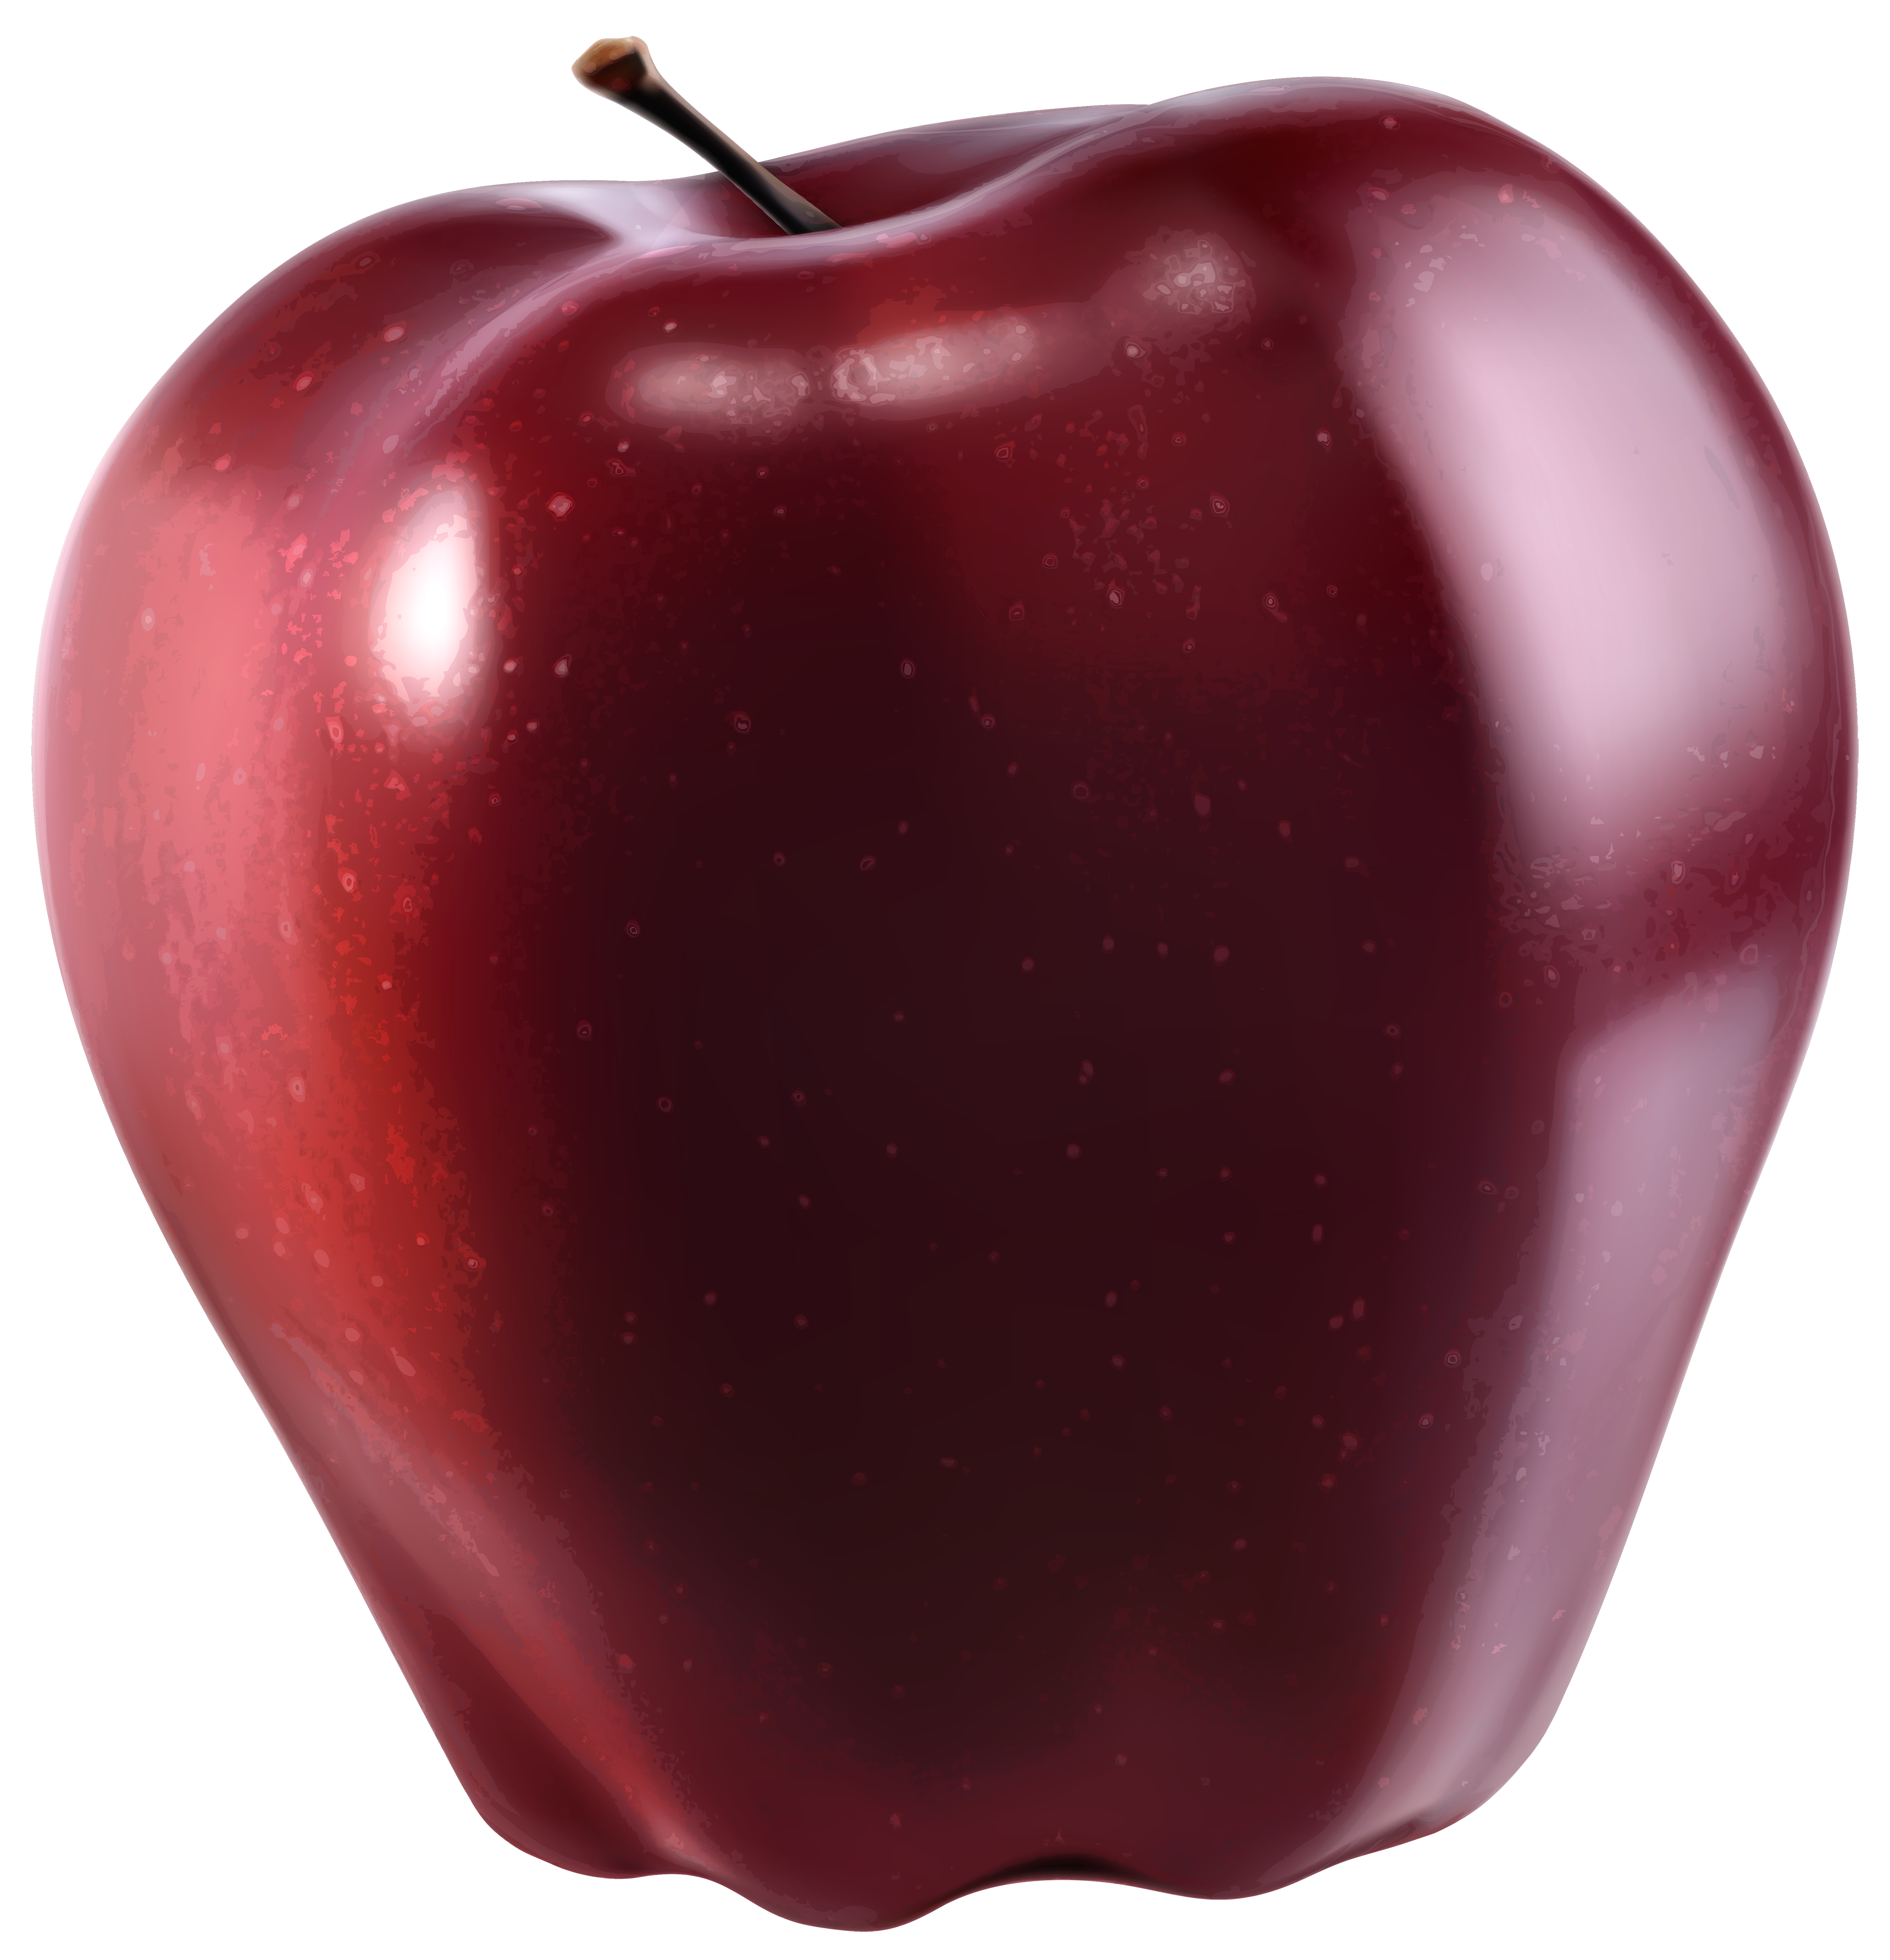 red apple clipart